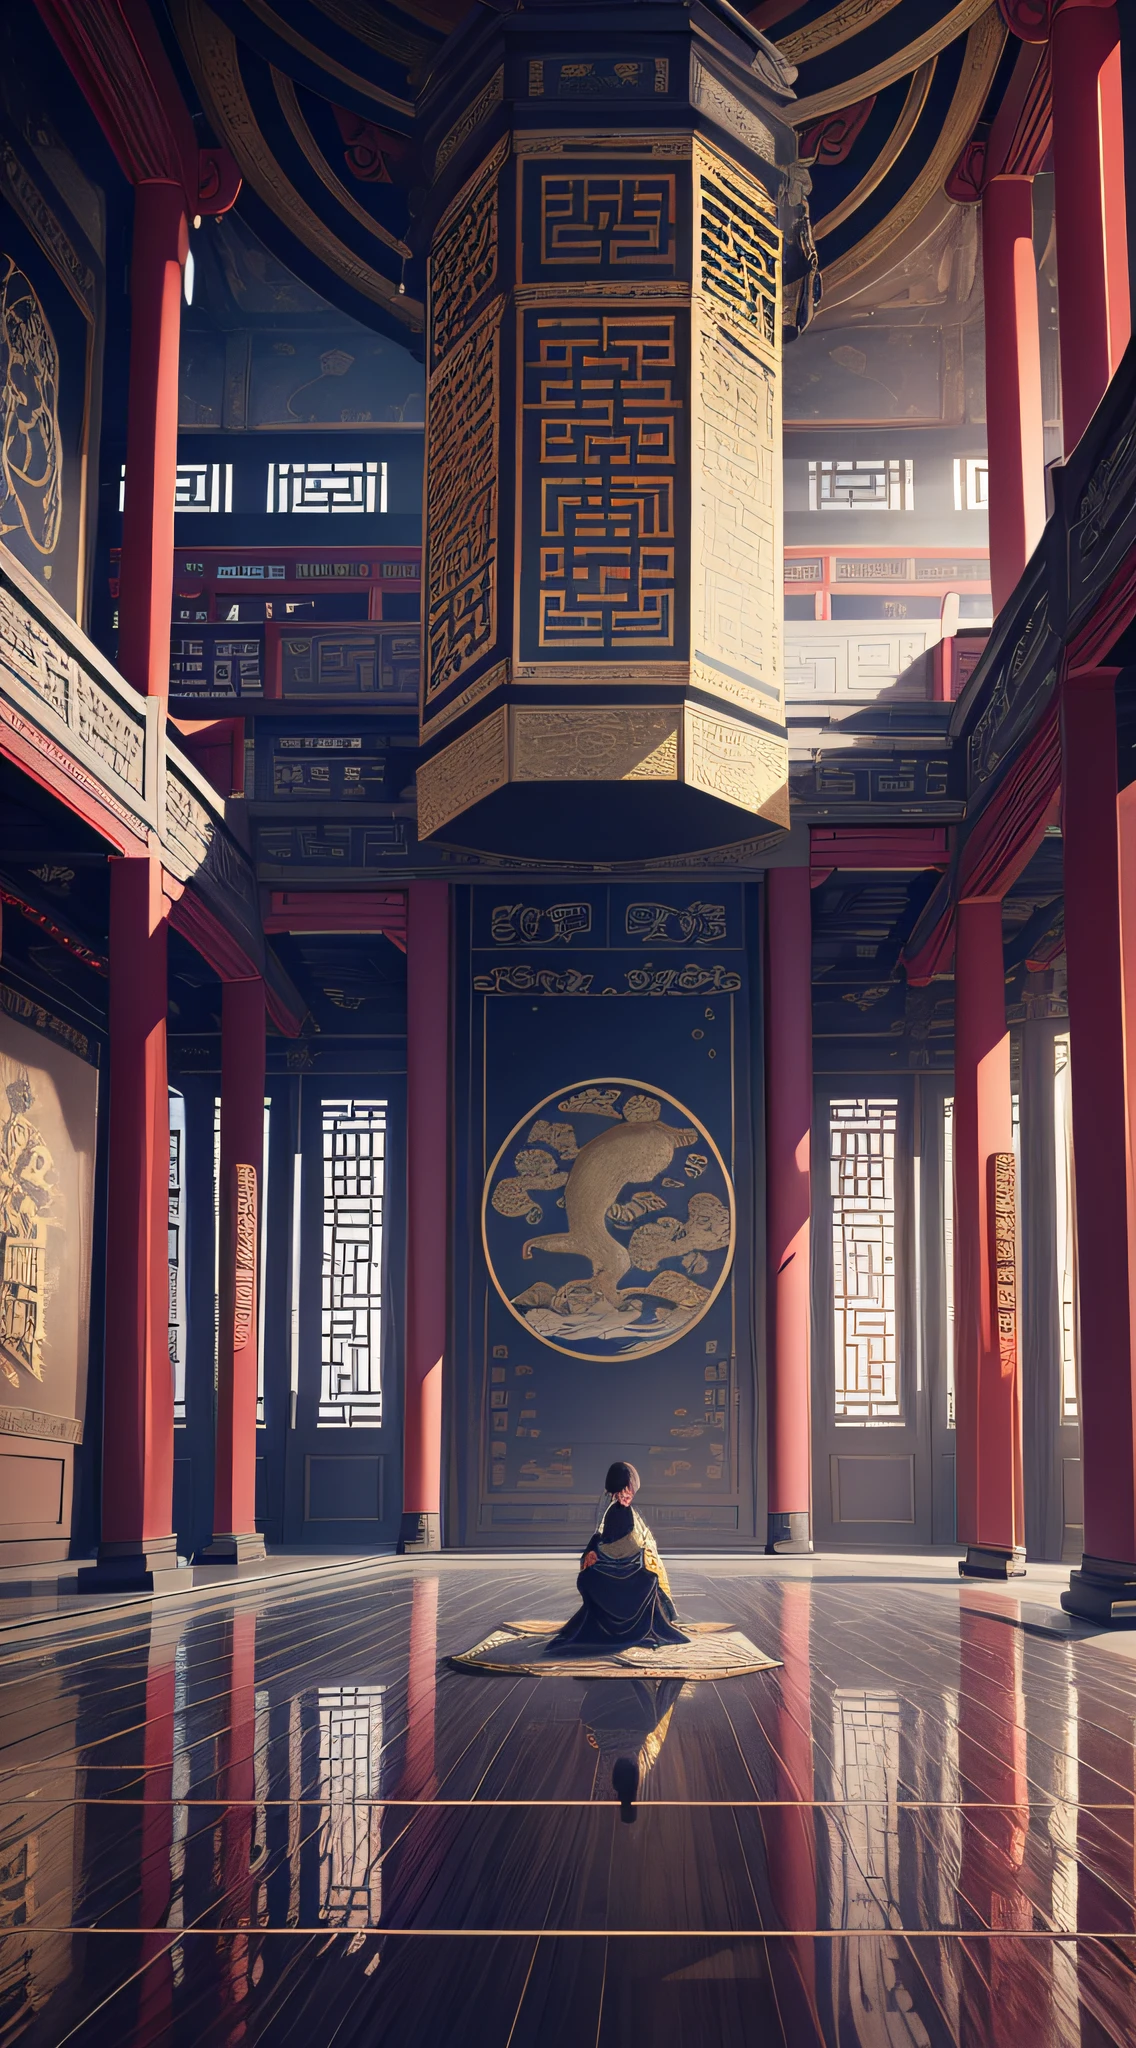 Panorama painting, epic ink painting, a hall of ancient Chinese architecture, exquisite interior decoration, one person sitting alone in the middle of the hall, depth of field effect, imaginative, fantasy, high-end color matching, can't believe how beautiful, spectacular, square, 16K